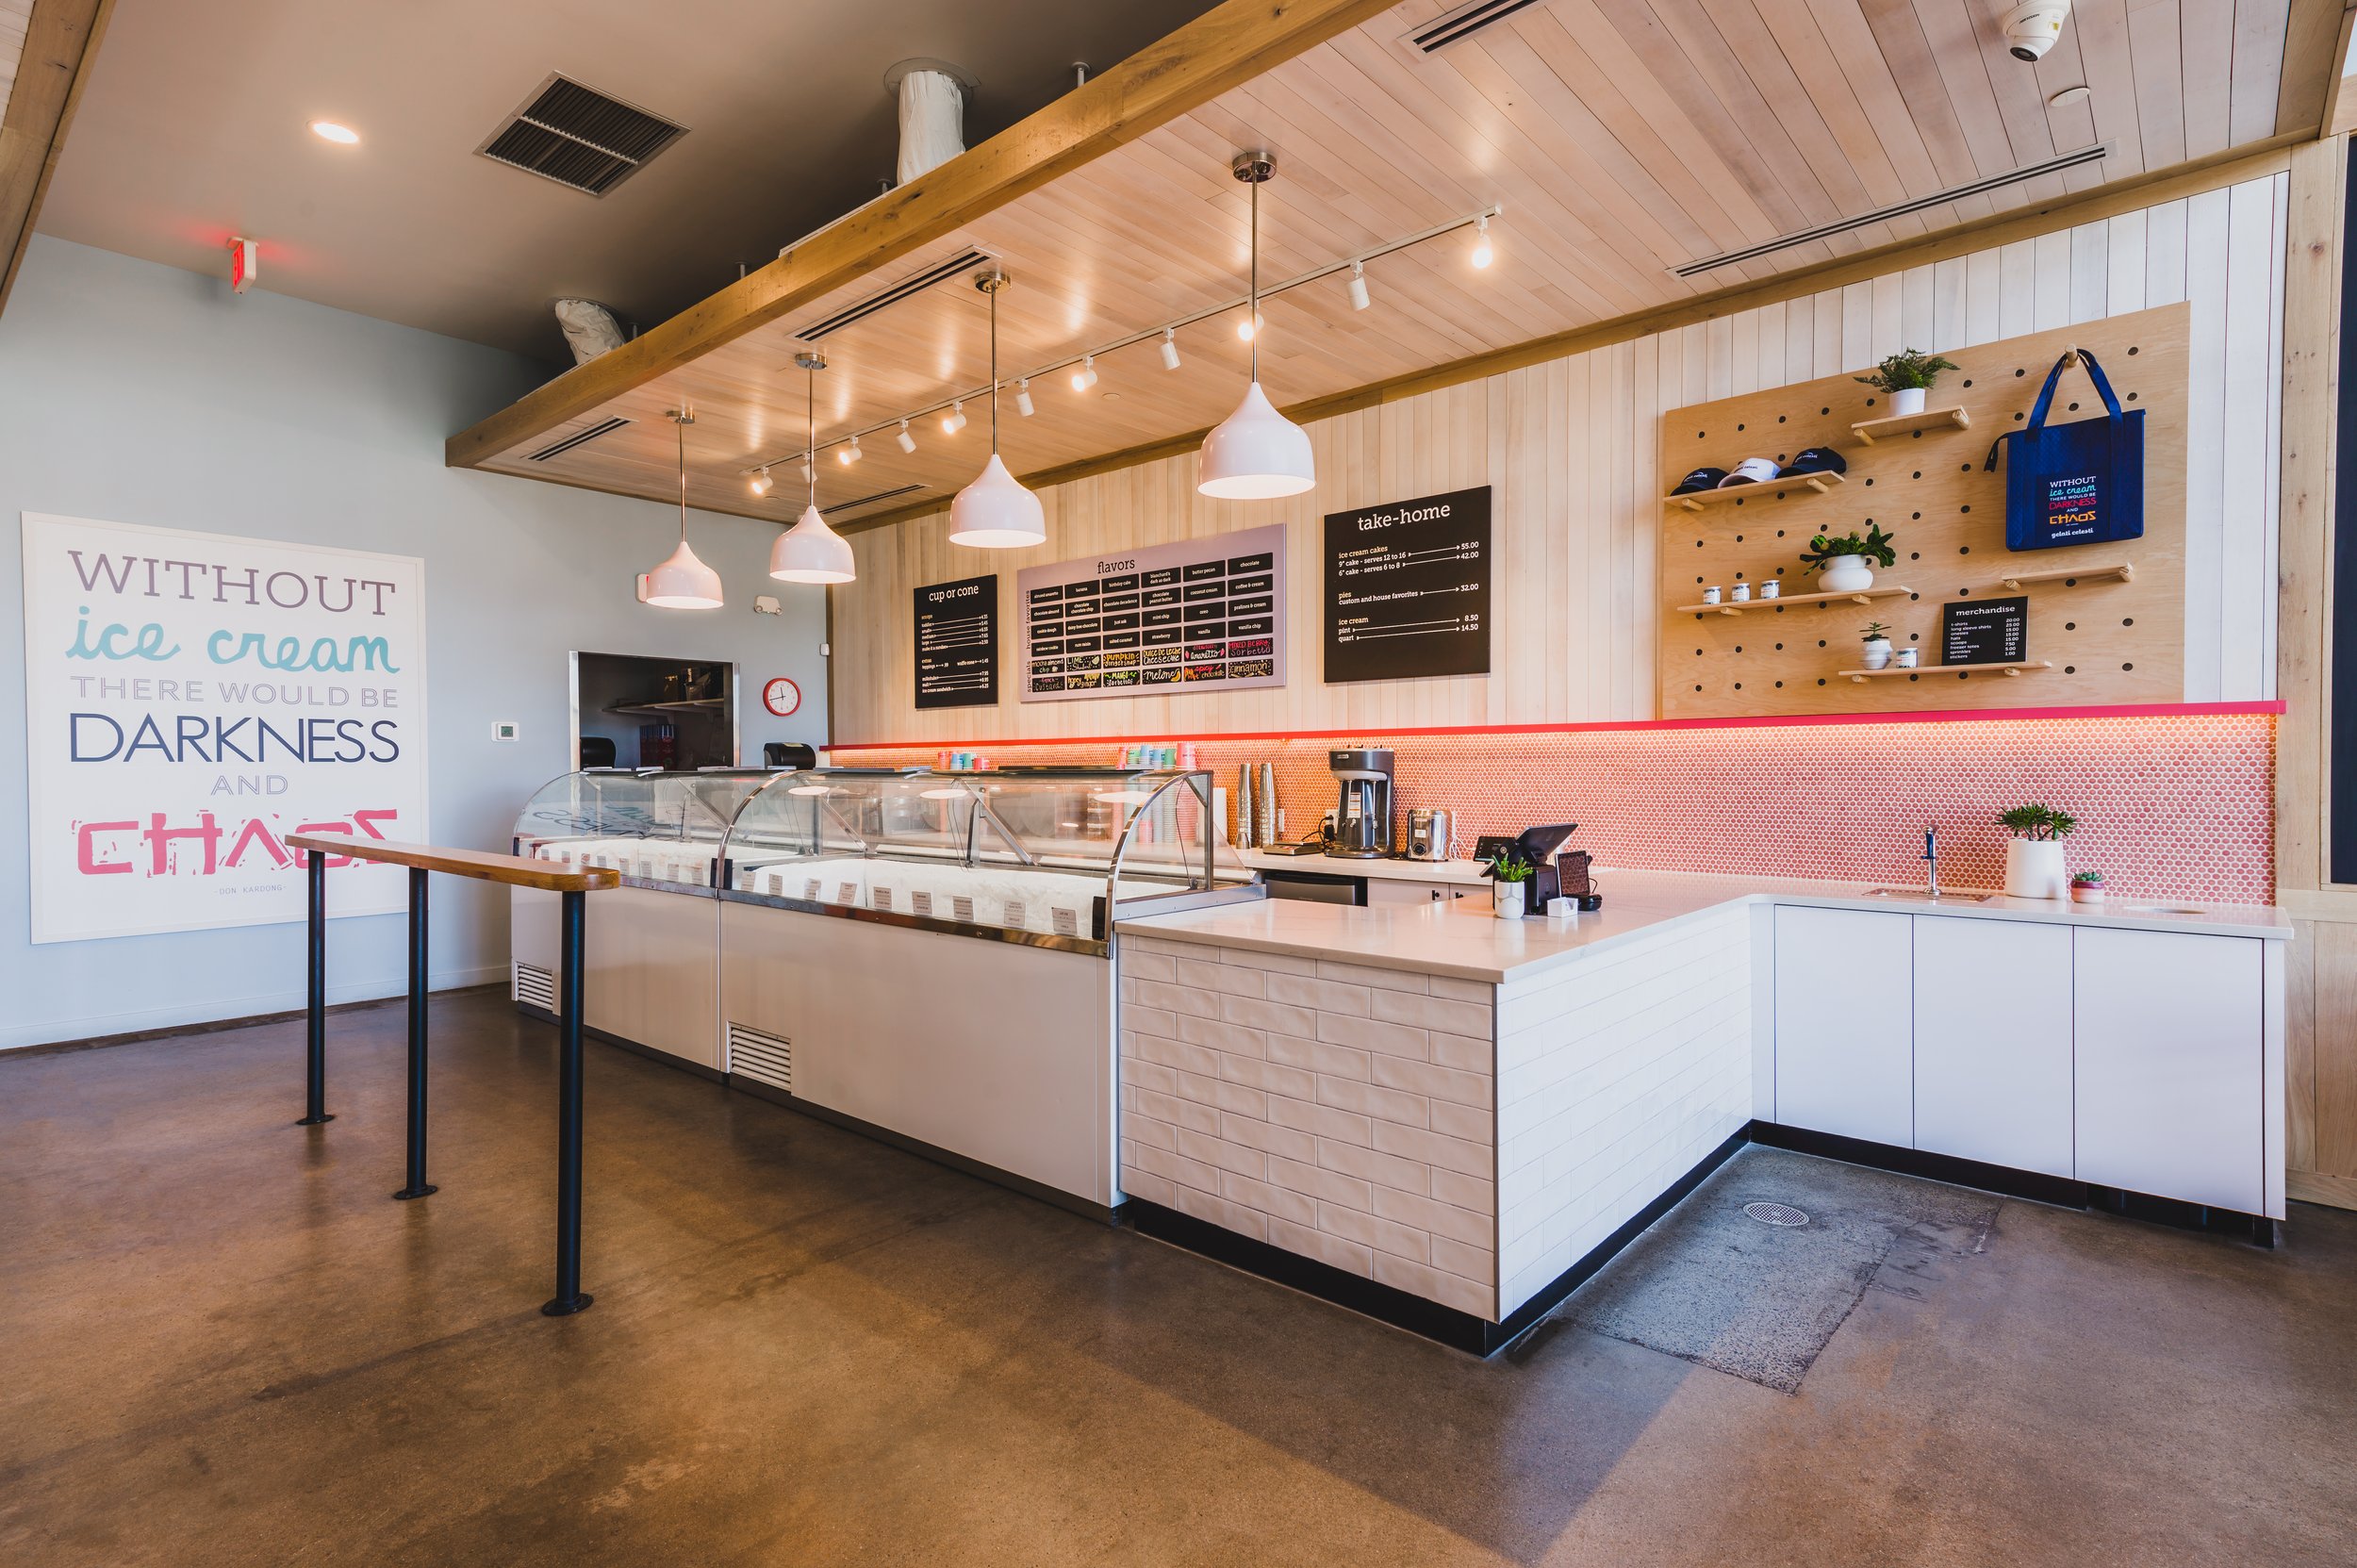 Ice cream parlor equipment: what professionals need | ISA